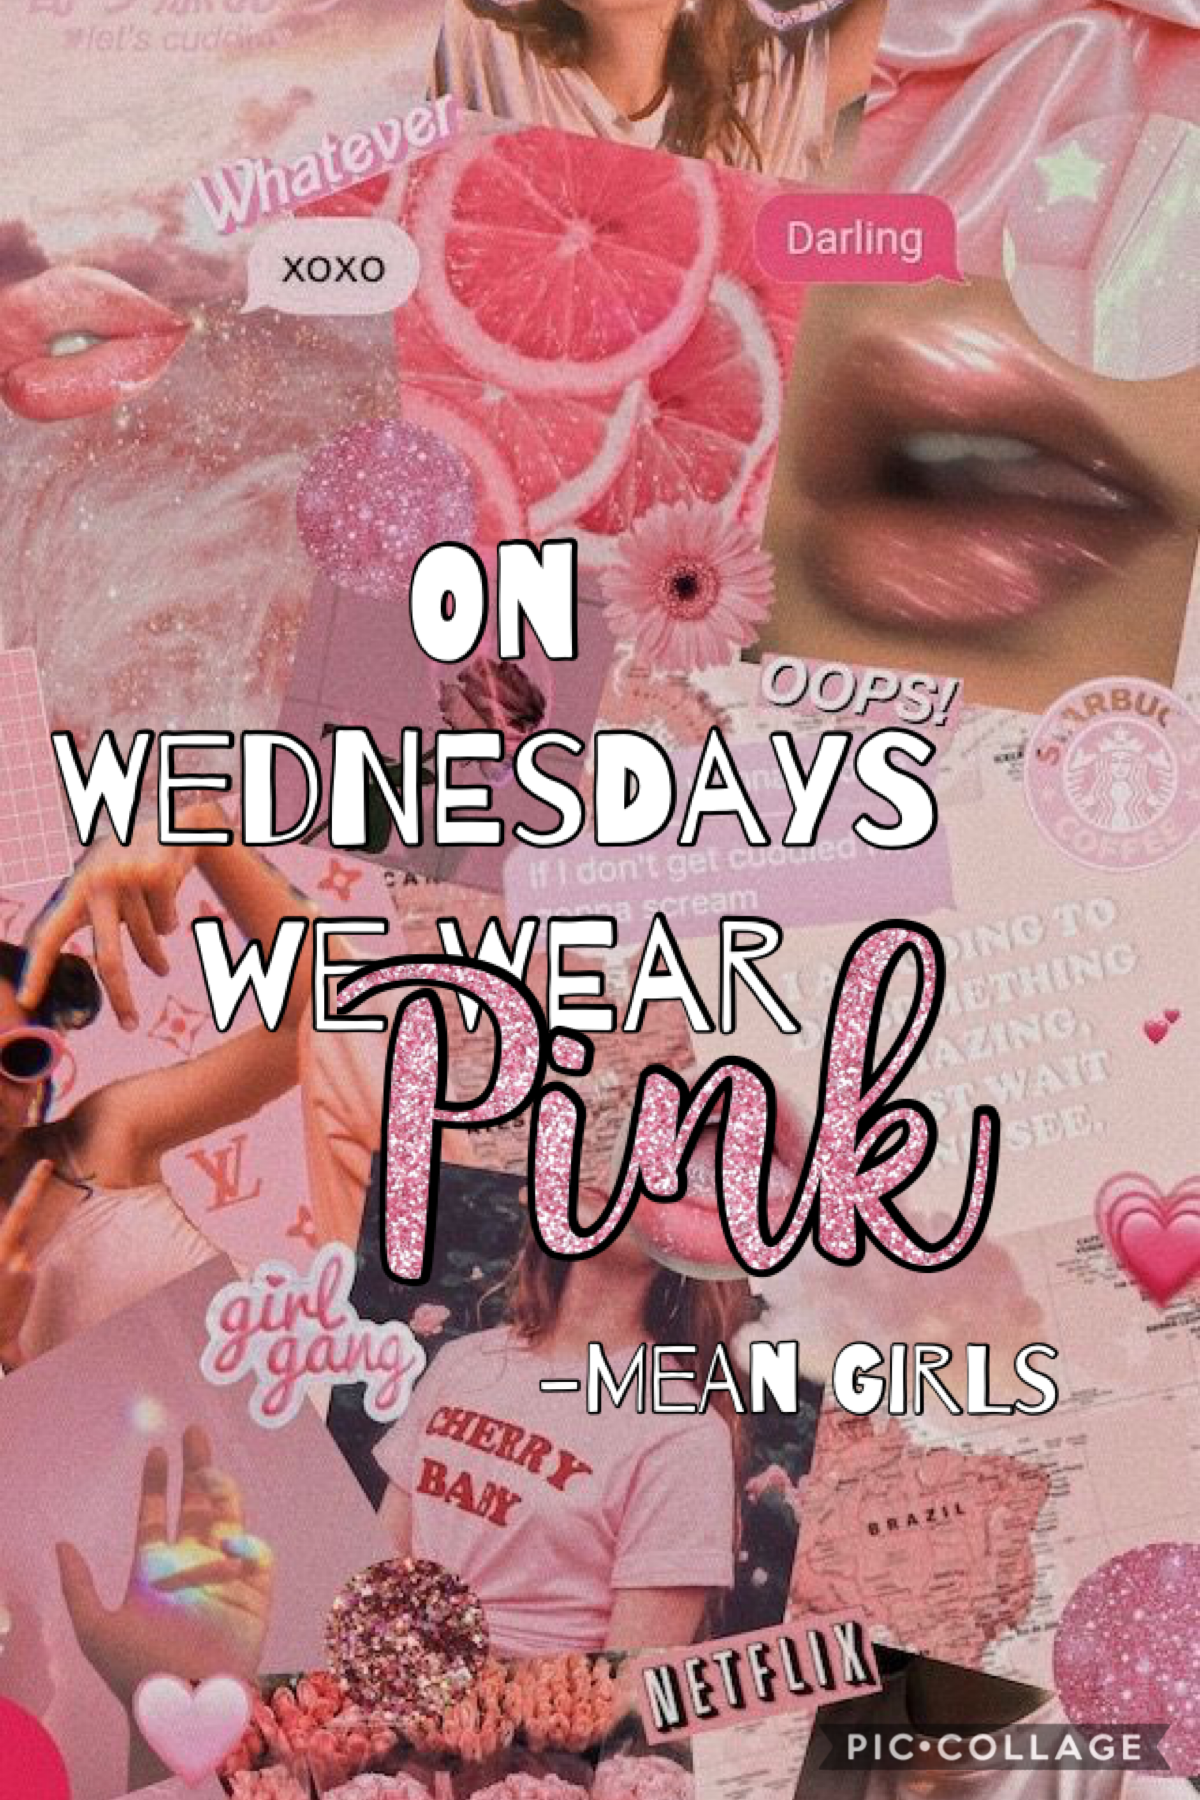 Who has seen mean girls? Also did you like mean girls 2? Let me know in the comments below. 🤔